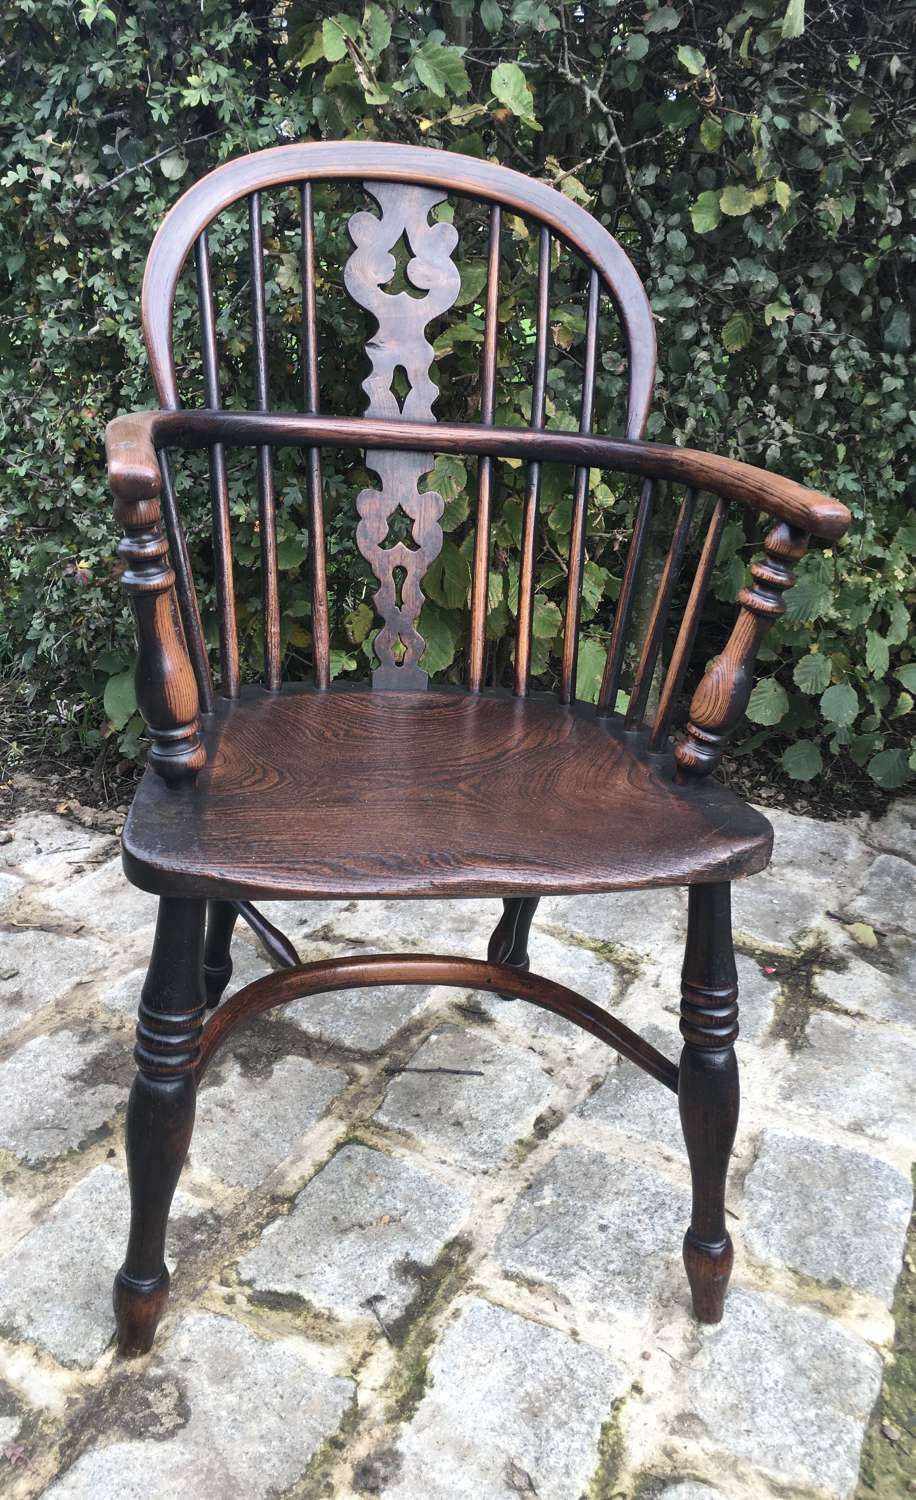 EARLY 19TH CENTURY LOW BACK ASH & ELM SEATED WINDSOR CHAIR